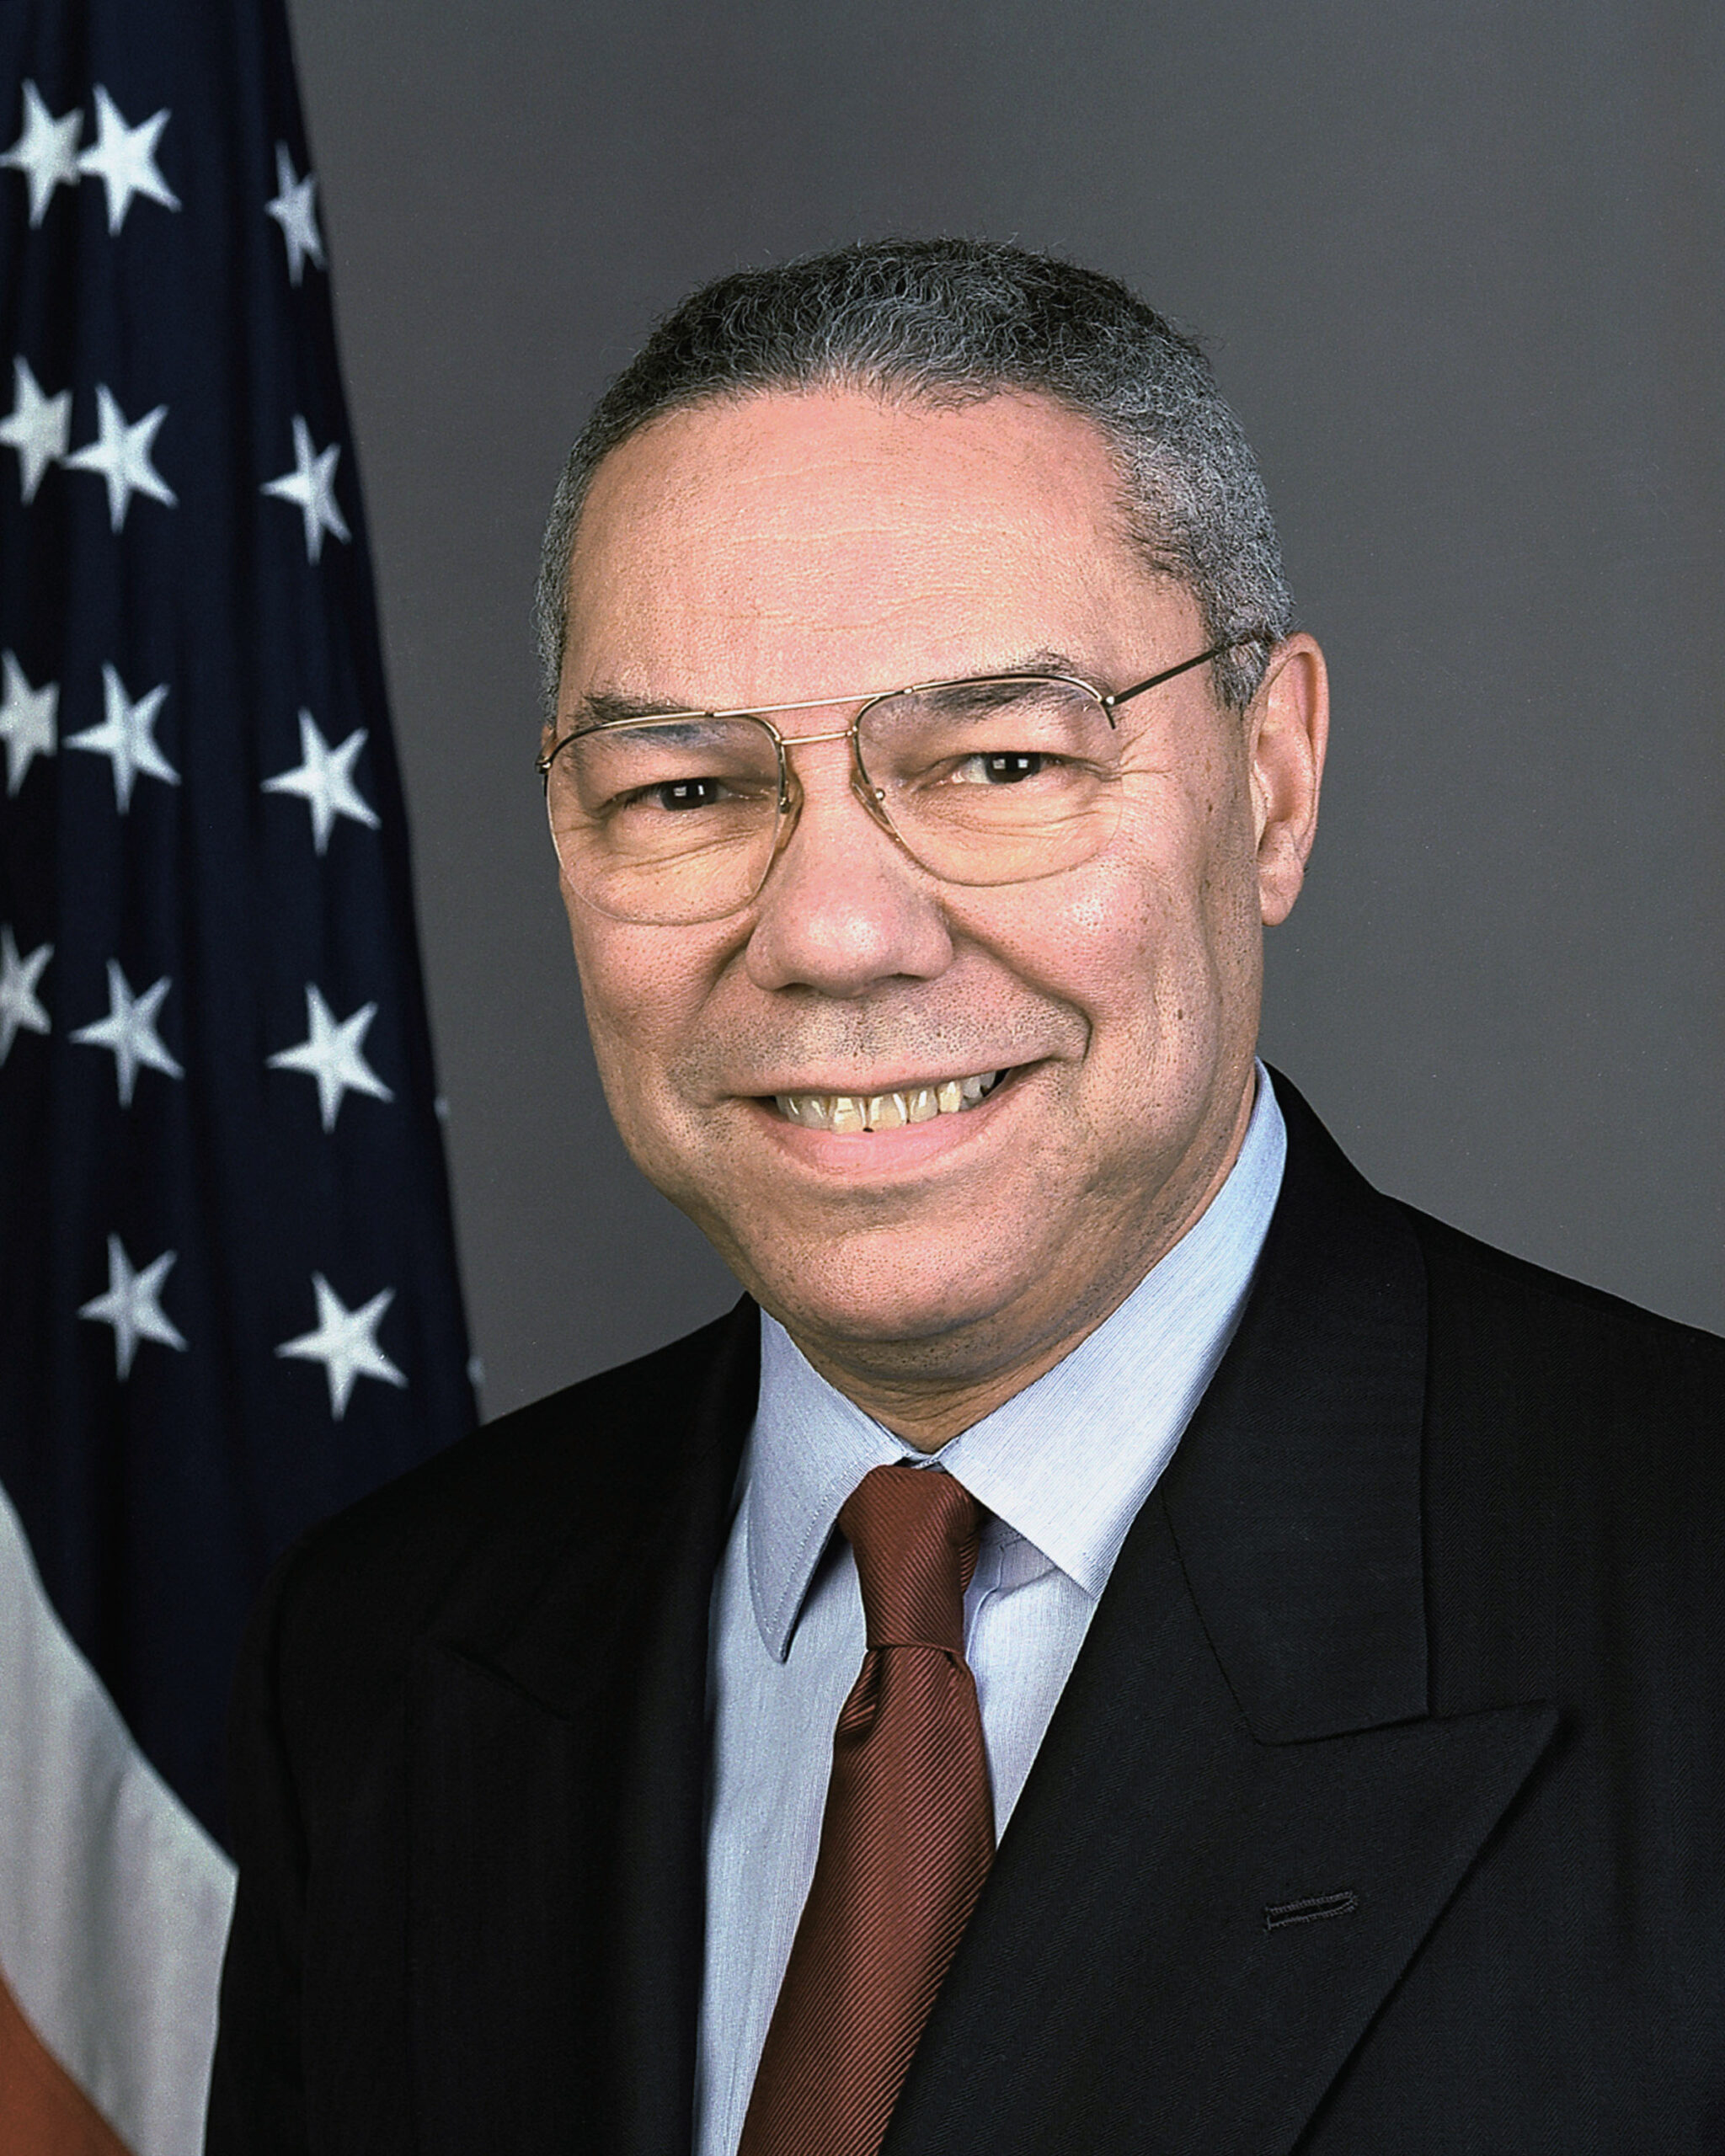 Colin Powell - official portrait as Secretary of State